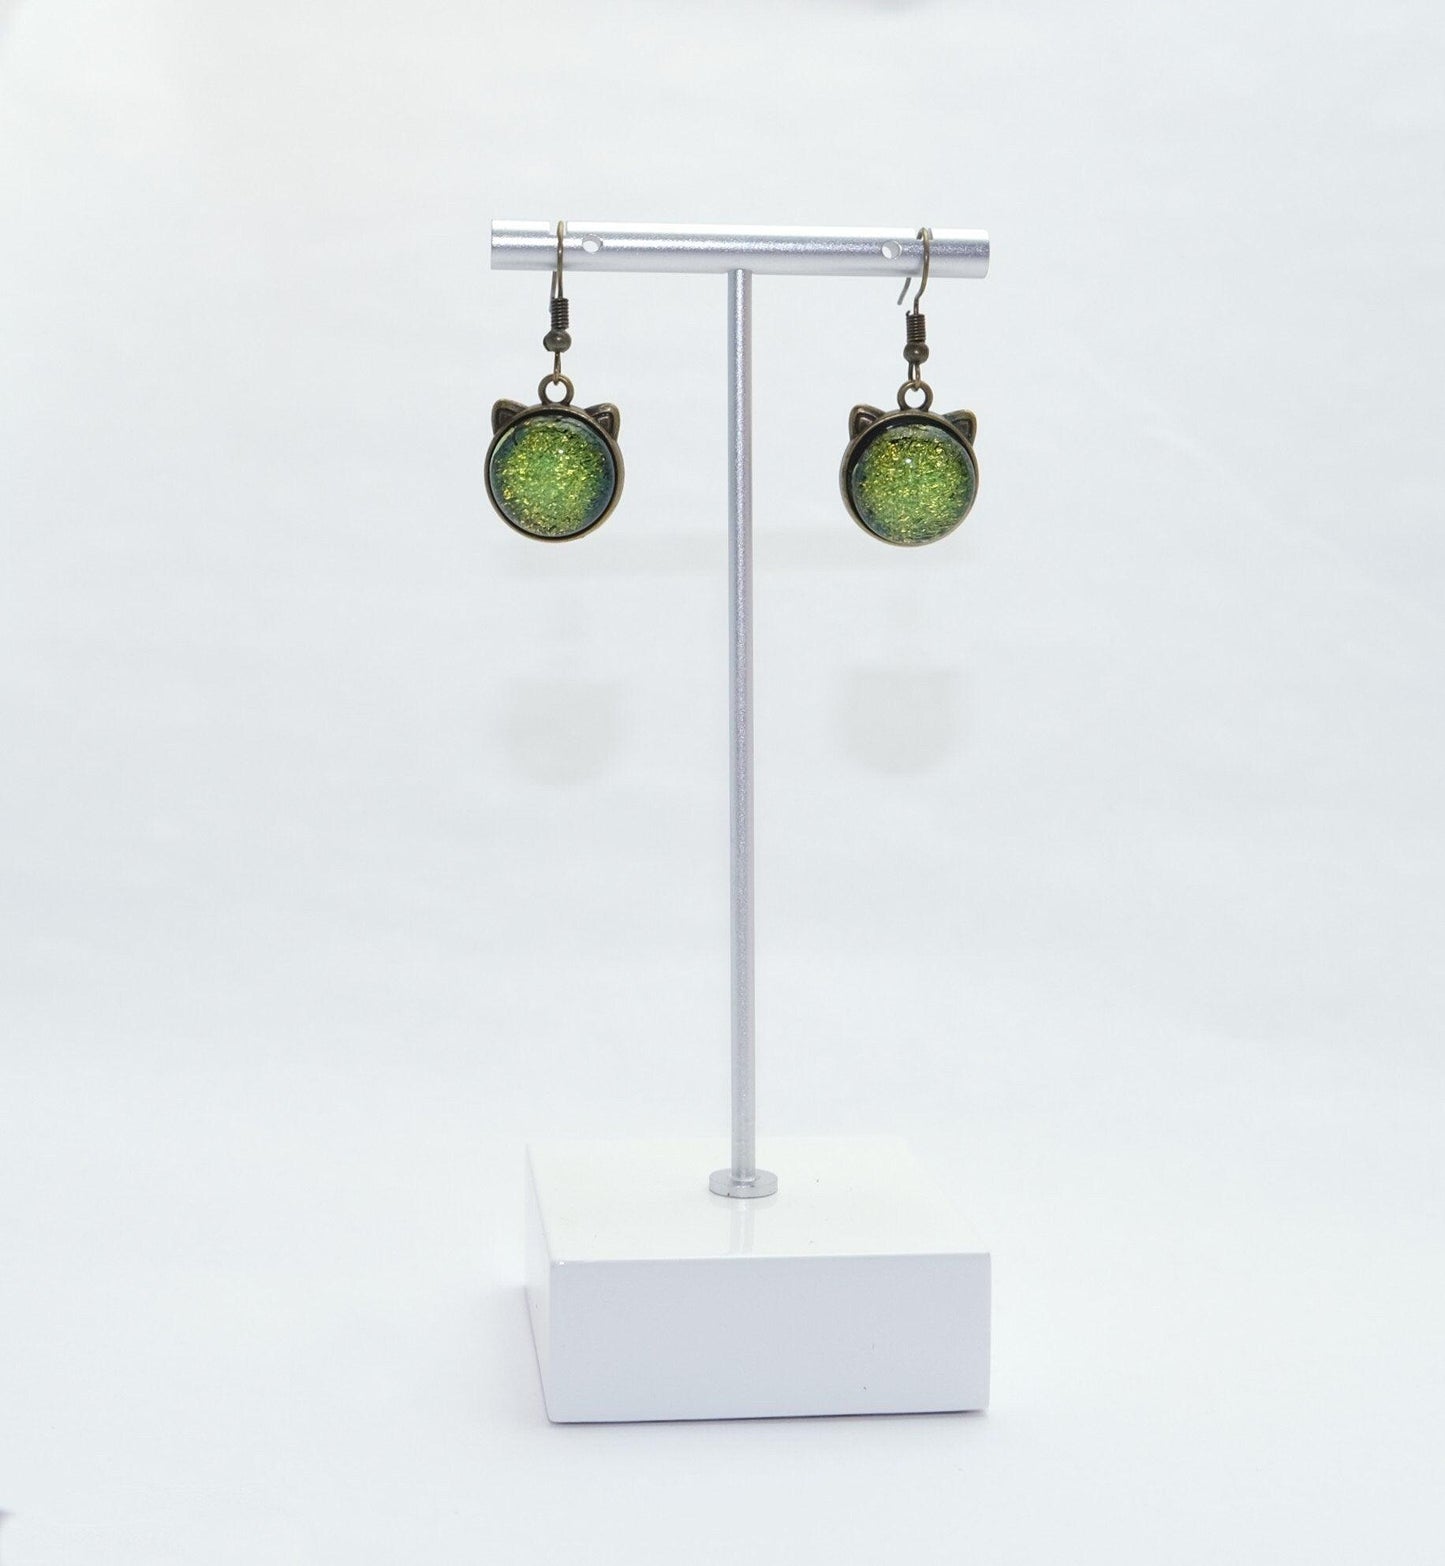 Whimsical Cat Head Shaped pierced Earrings - Brass Tone with Yellow Green Dichroic Glass seedsglassworks seeds glassworks